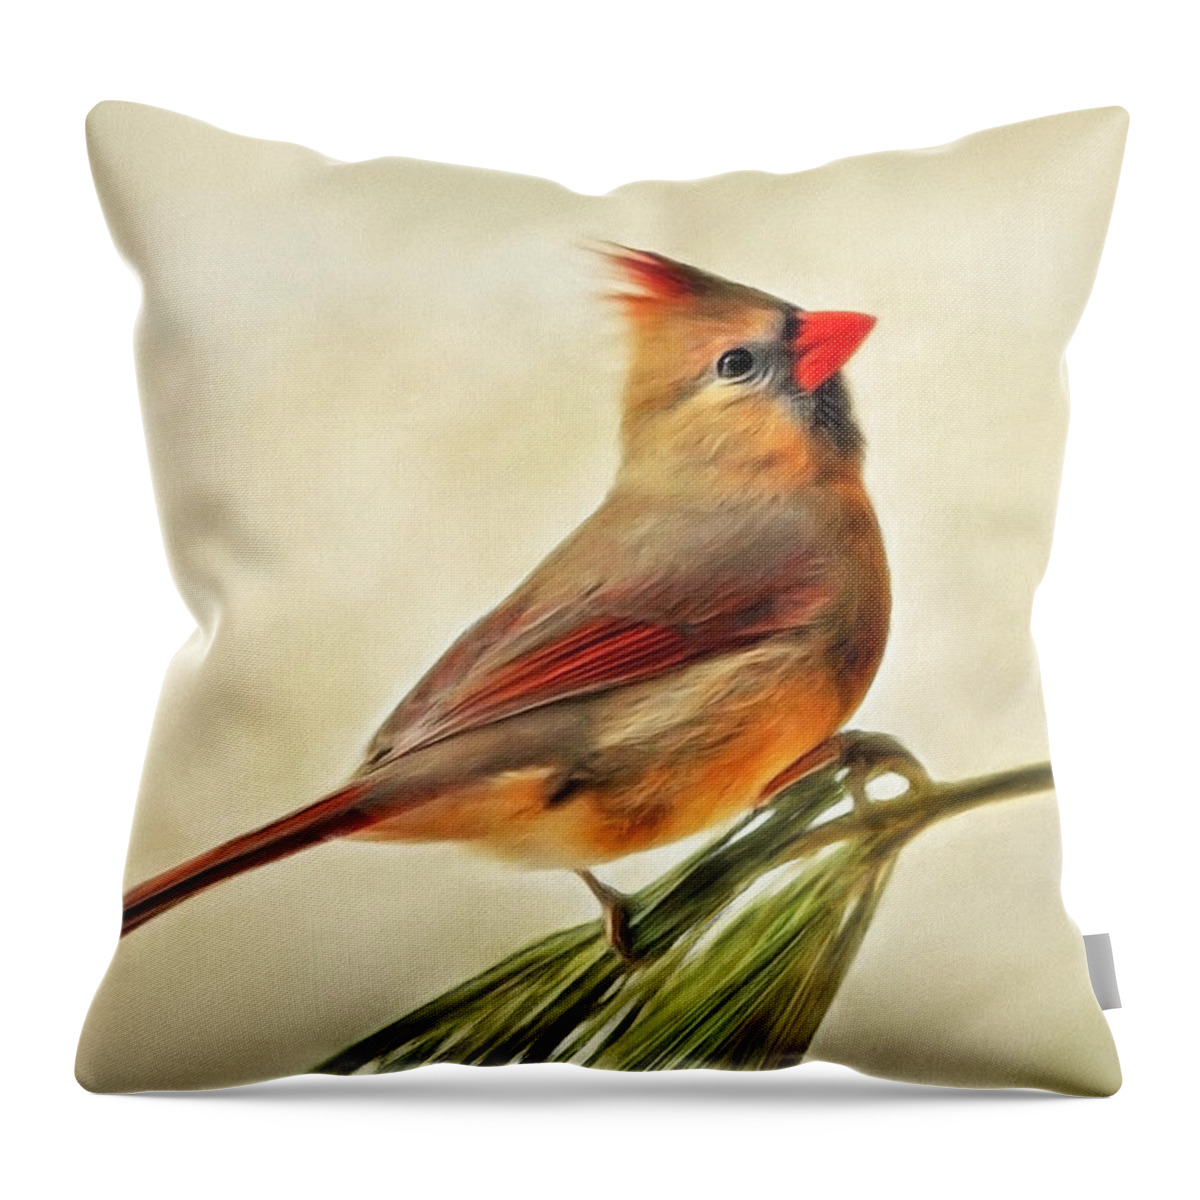 Winter Throw Pillow featuring the painting Winter Cardinal by Christina Rollo